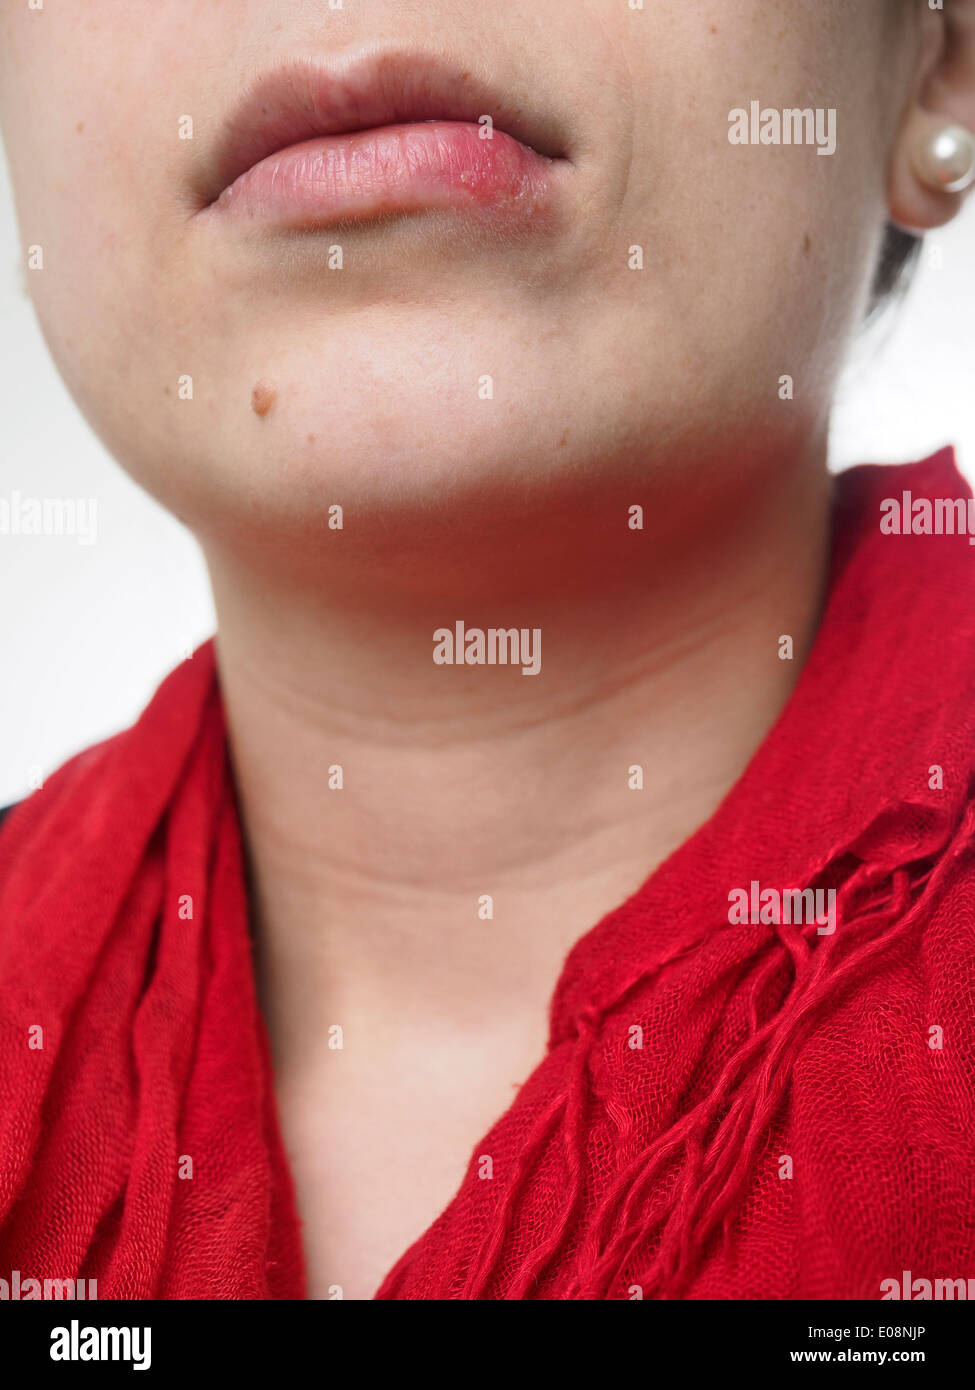 Young woman with herpes simplex on lip Stock Photo